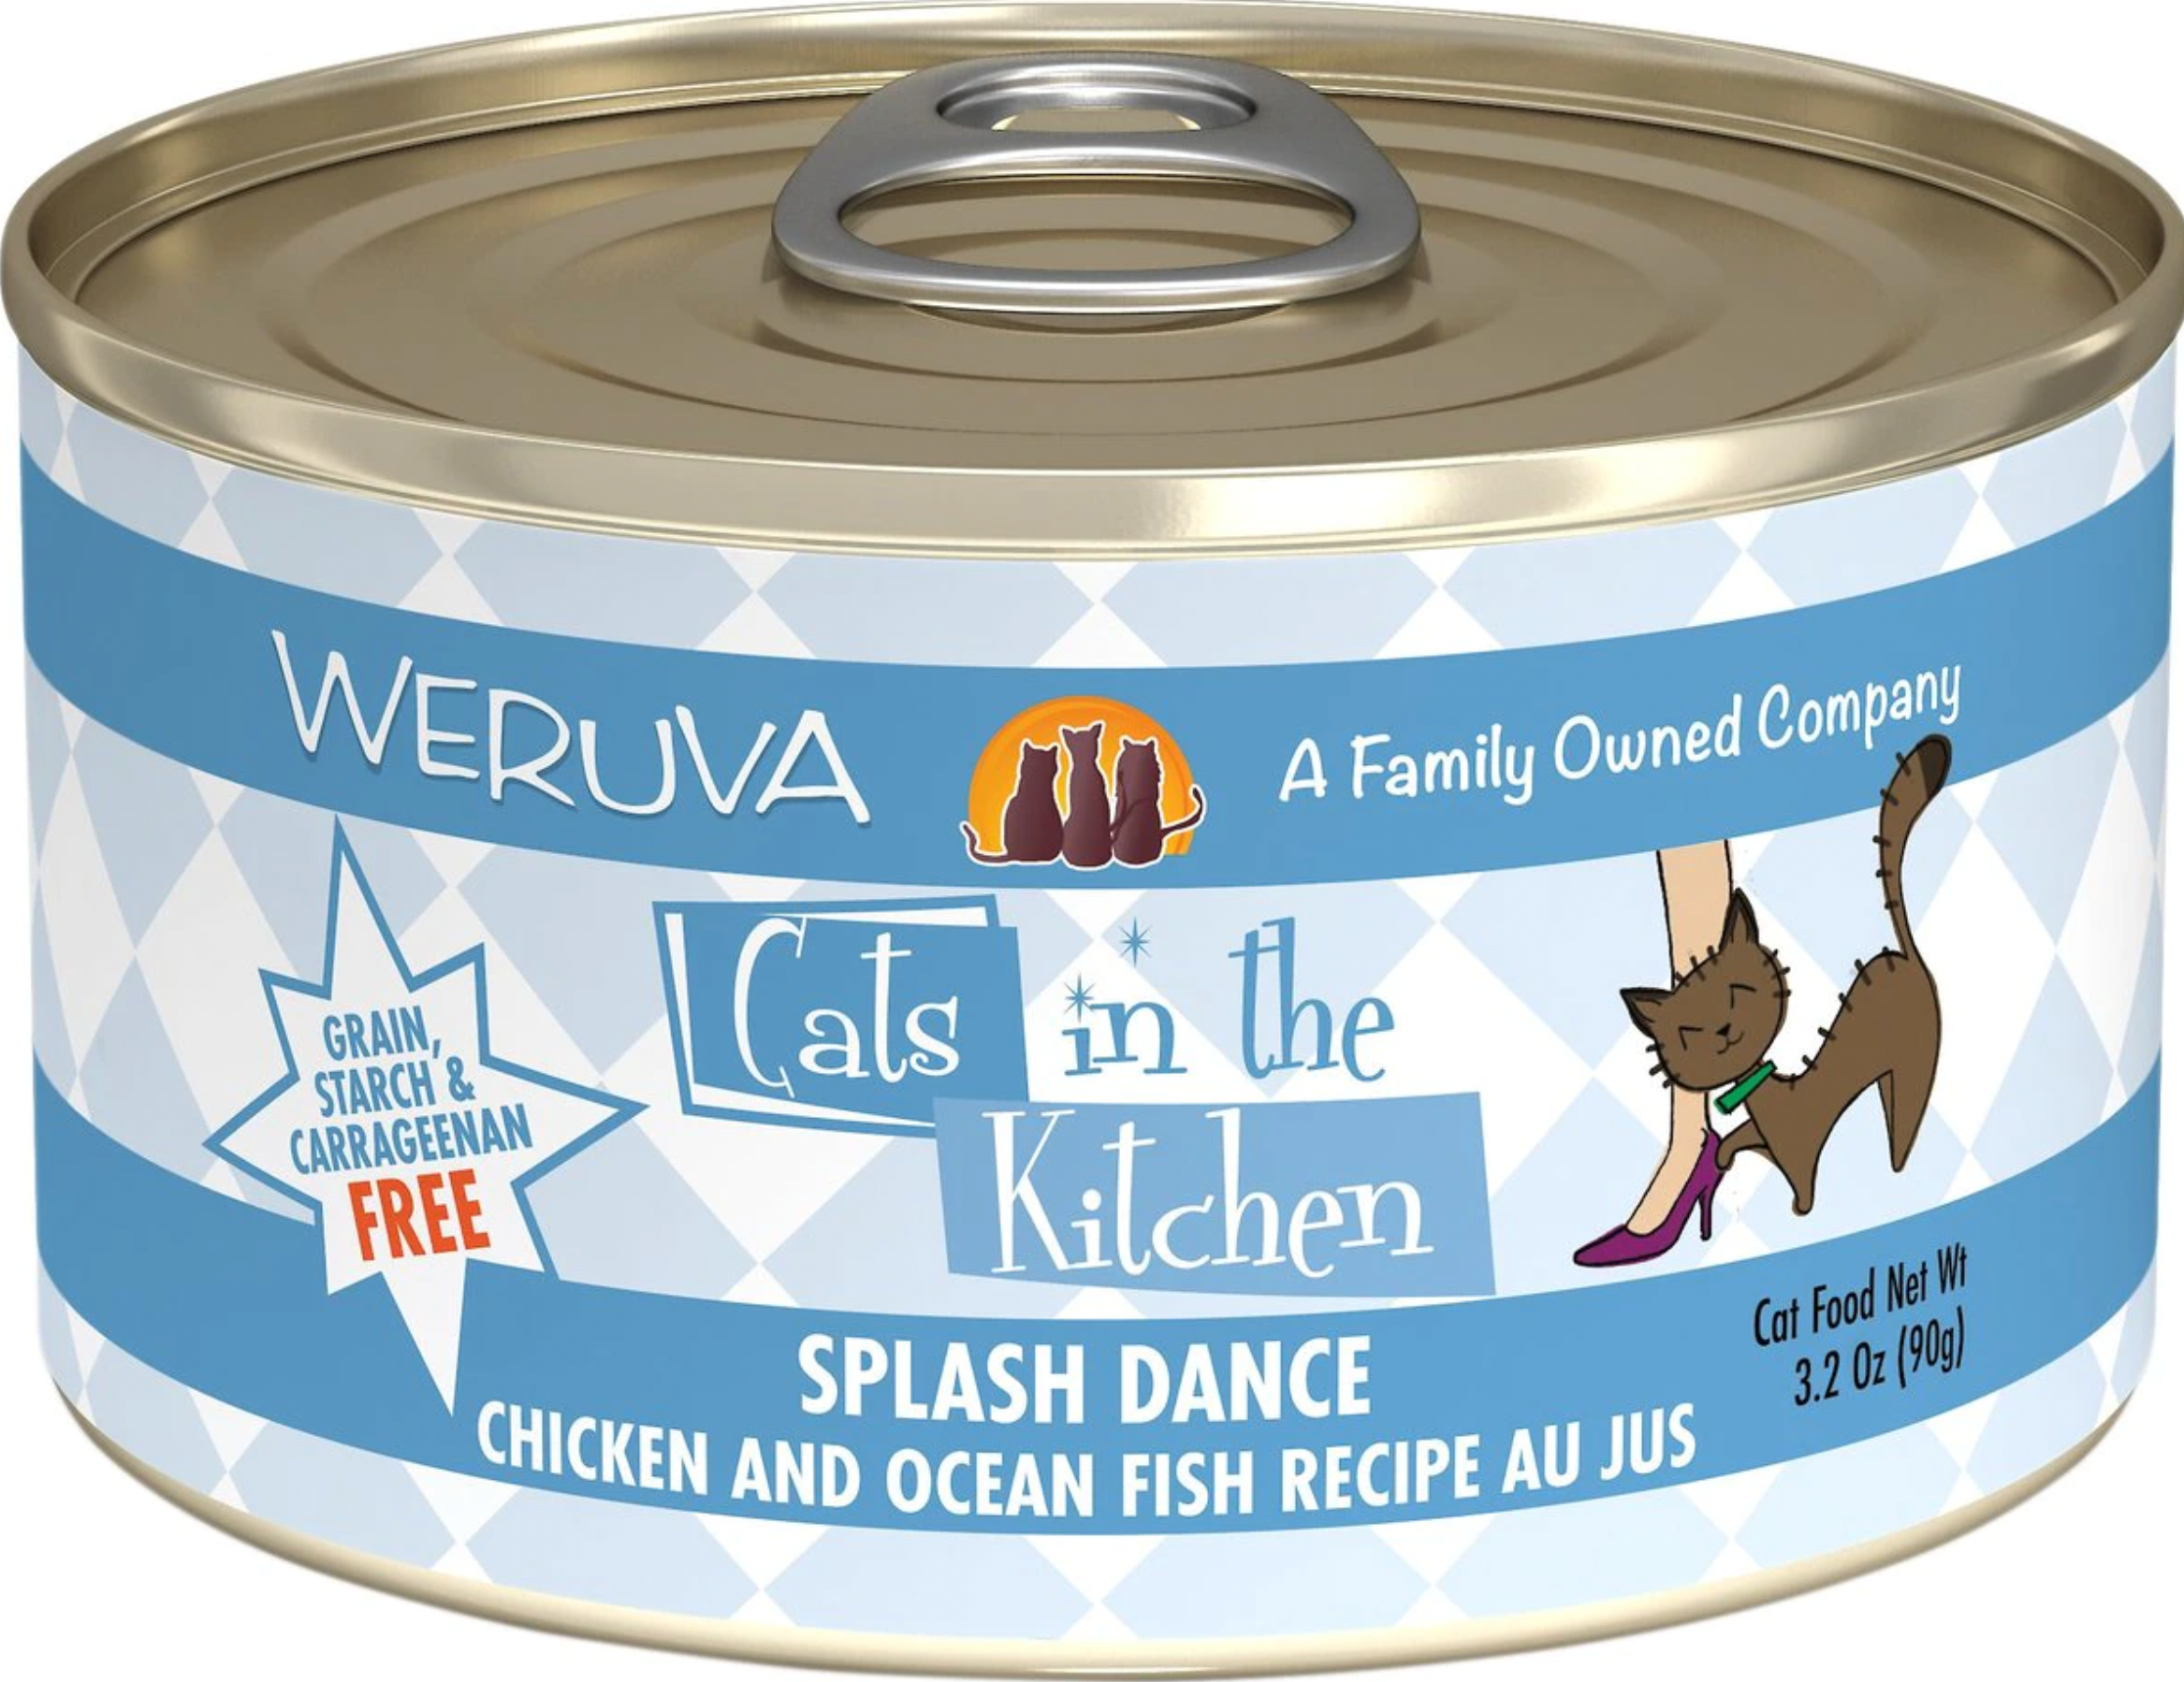 Weruva Cats In The Kitchen "Splash Dance" Chicken and Ocean Fish Au Jus Recipe Canned Cat Food